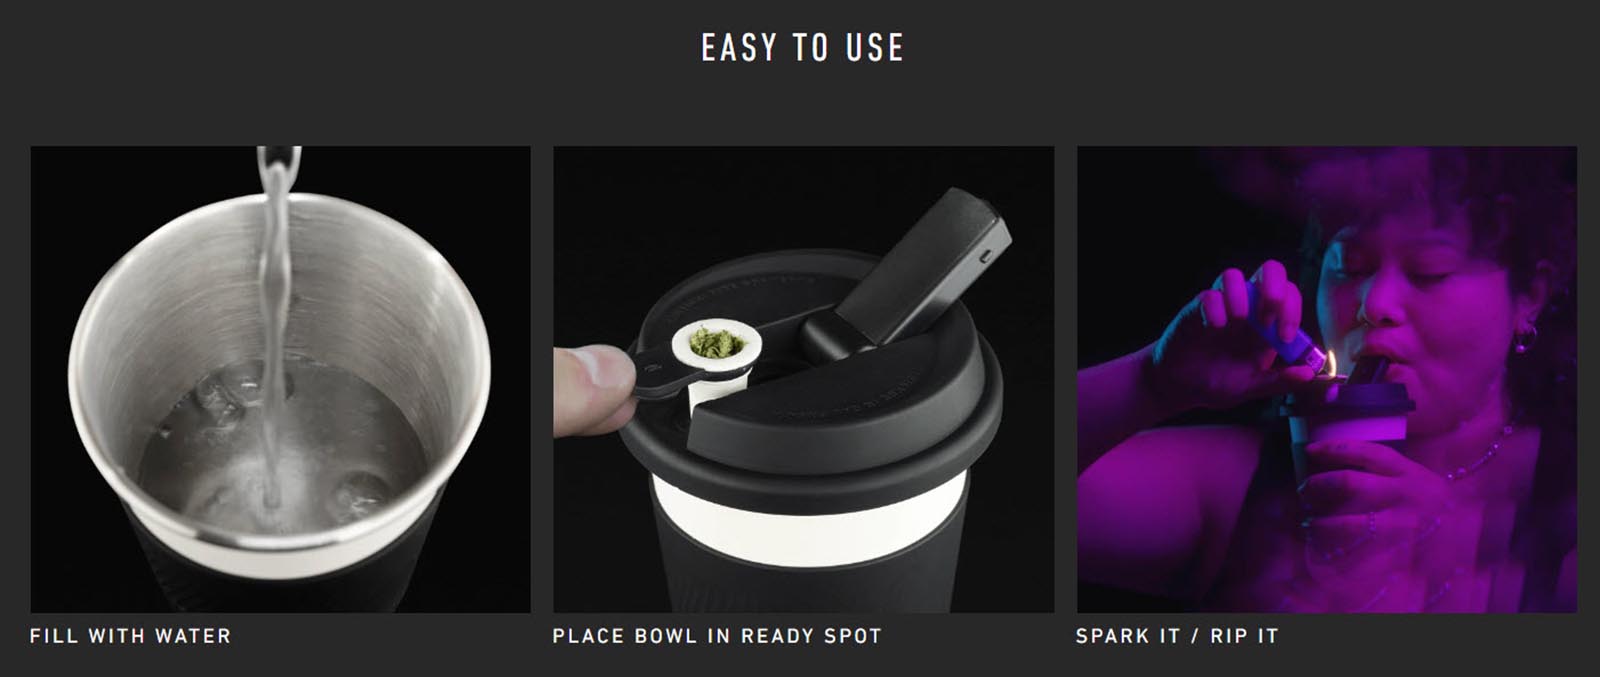 Puffco Cupsy is so easy to use